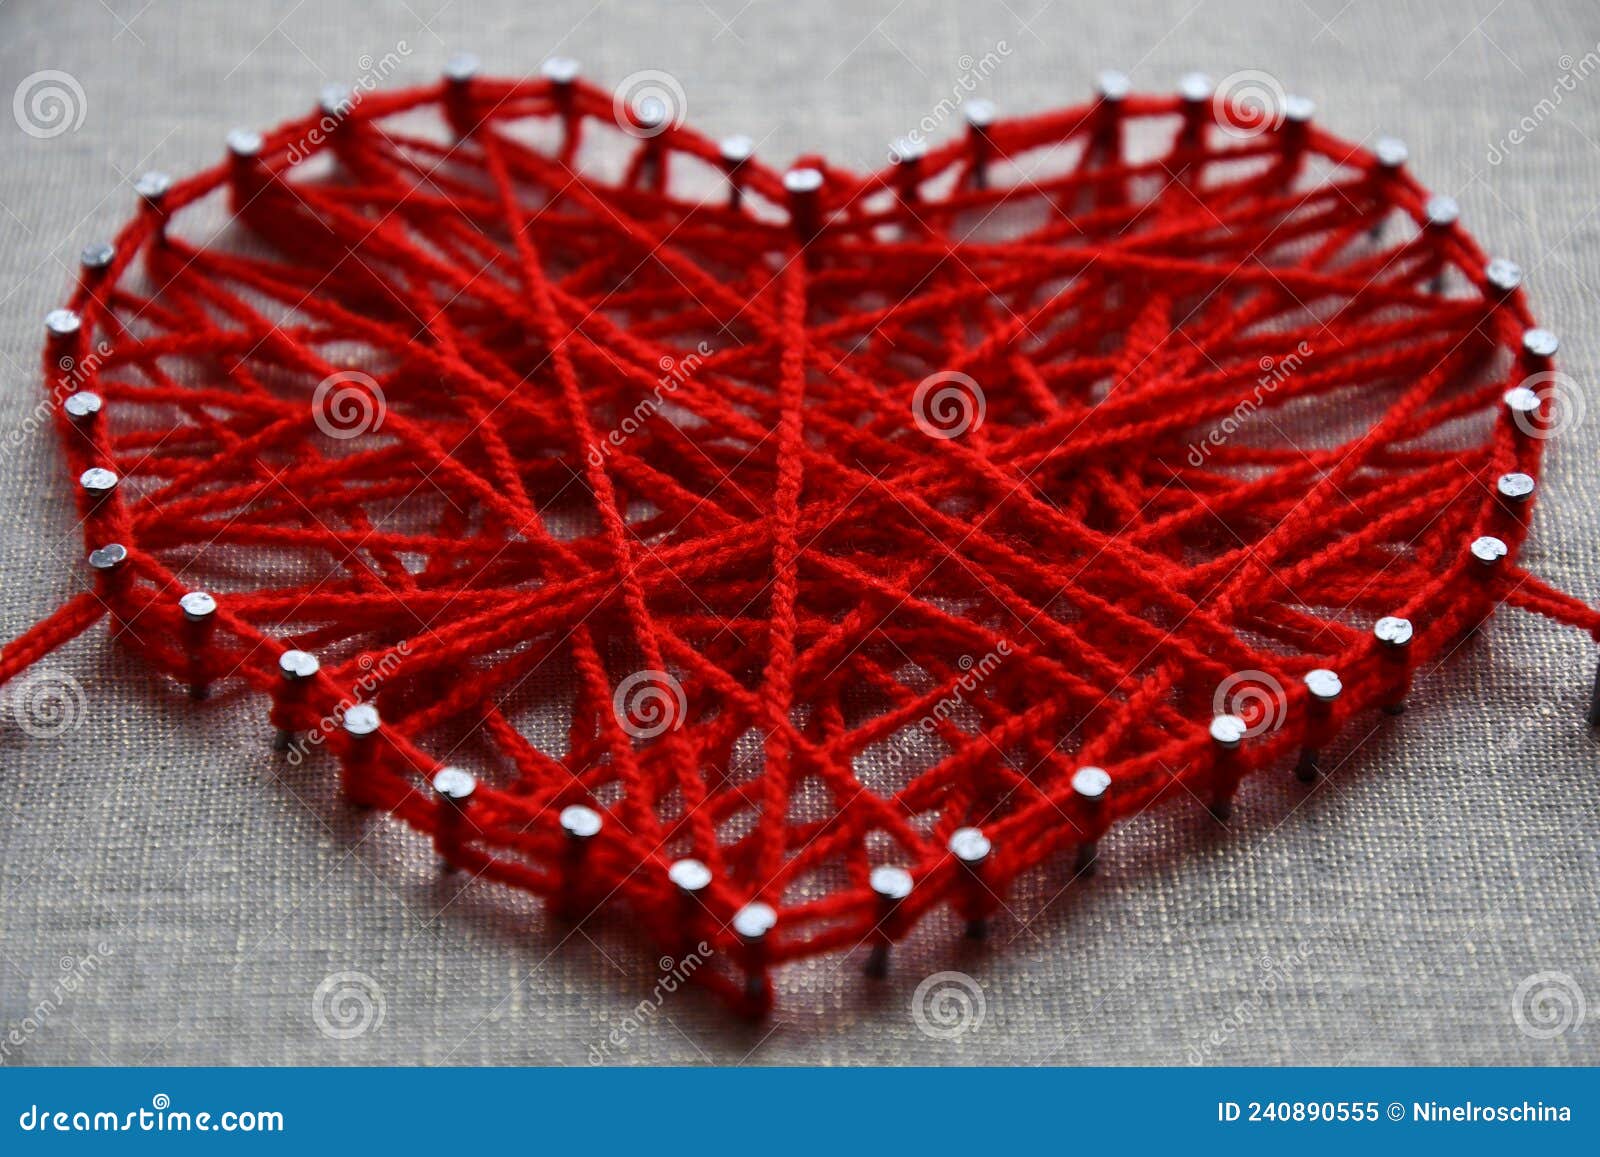 red heart string art made tangled yarn metal nails canvas background craft shape woolen symbol love wool threads 240890555